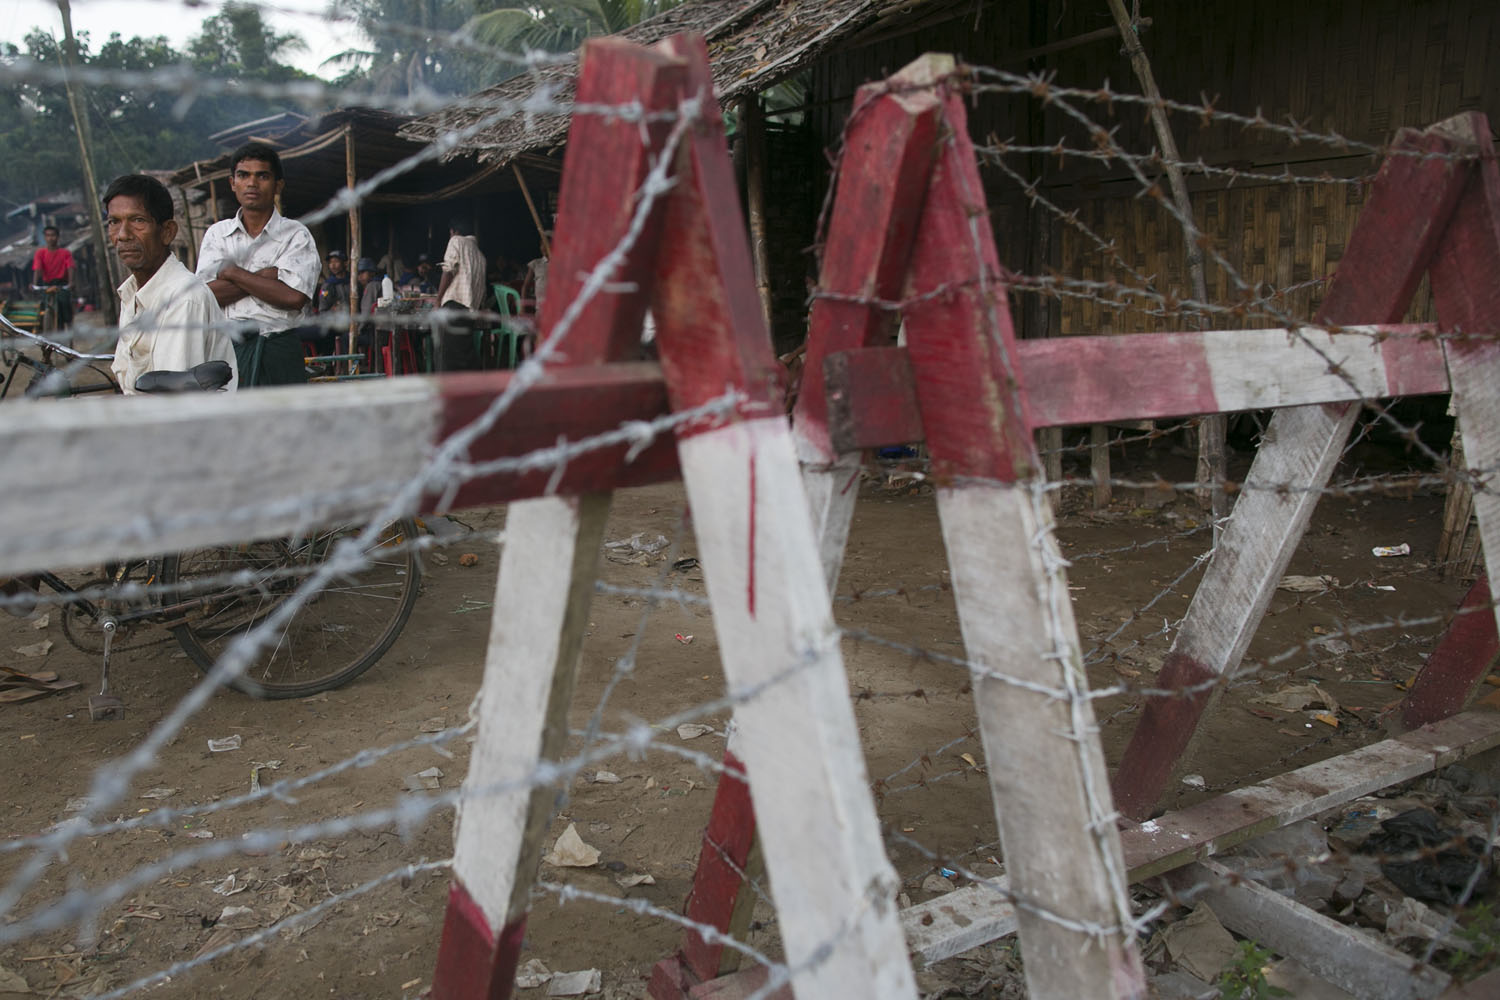 Rohingya men look out from behind a barbed-wire fence used as a barrier to restrict travel on Nov. 25, 2012, on the outskirts of Sittwe in Burma